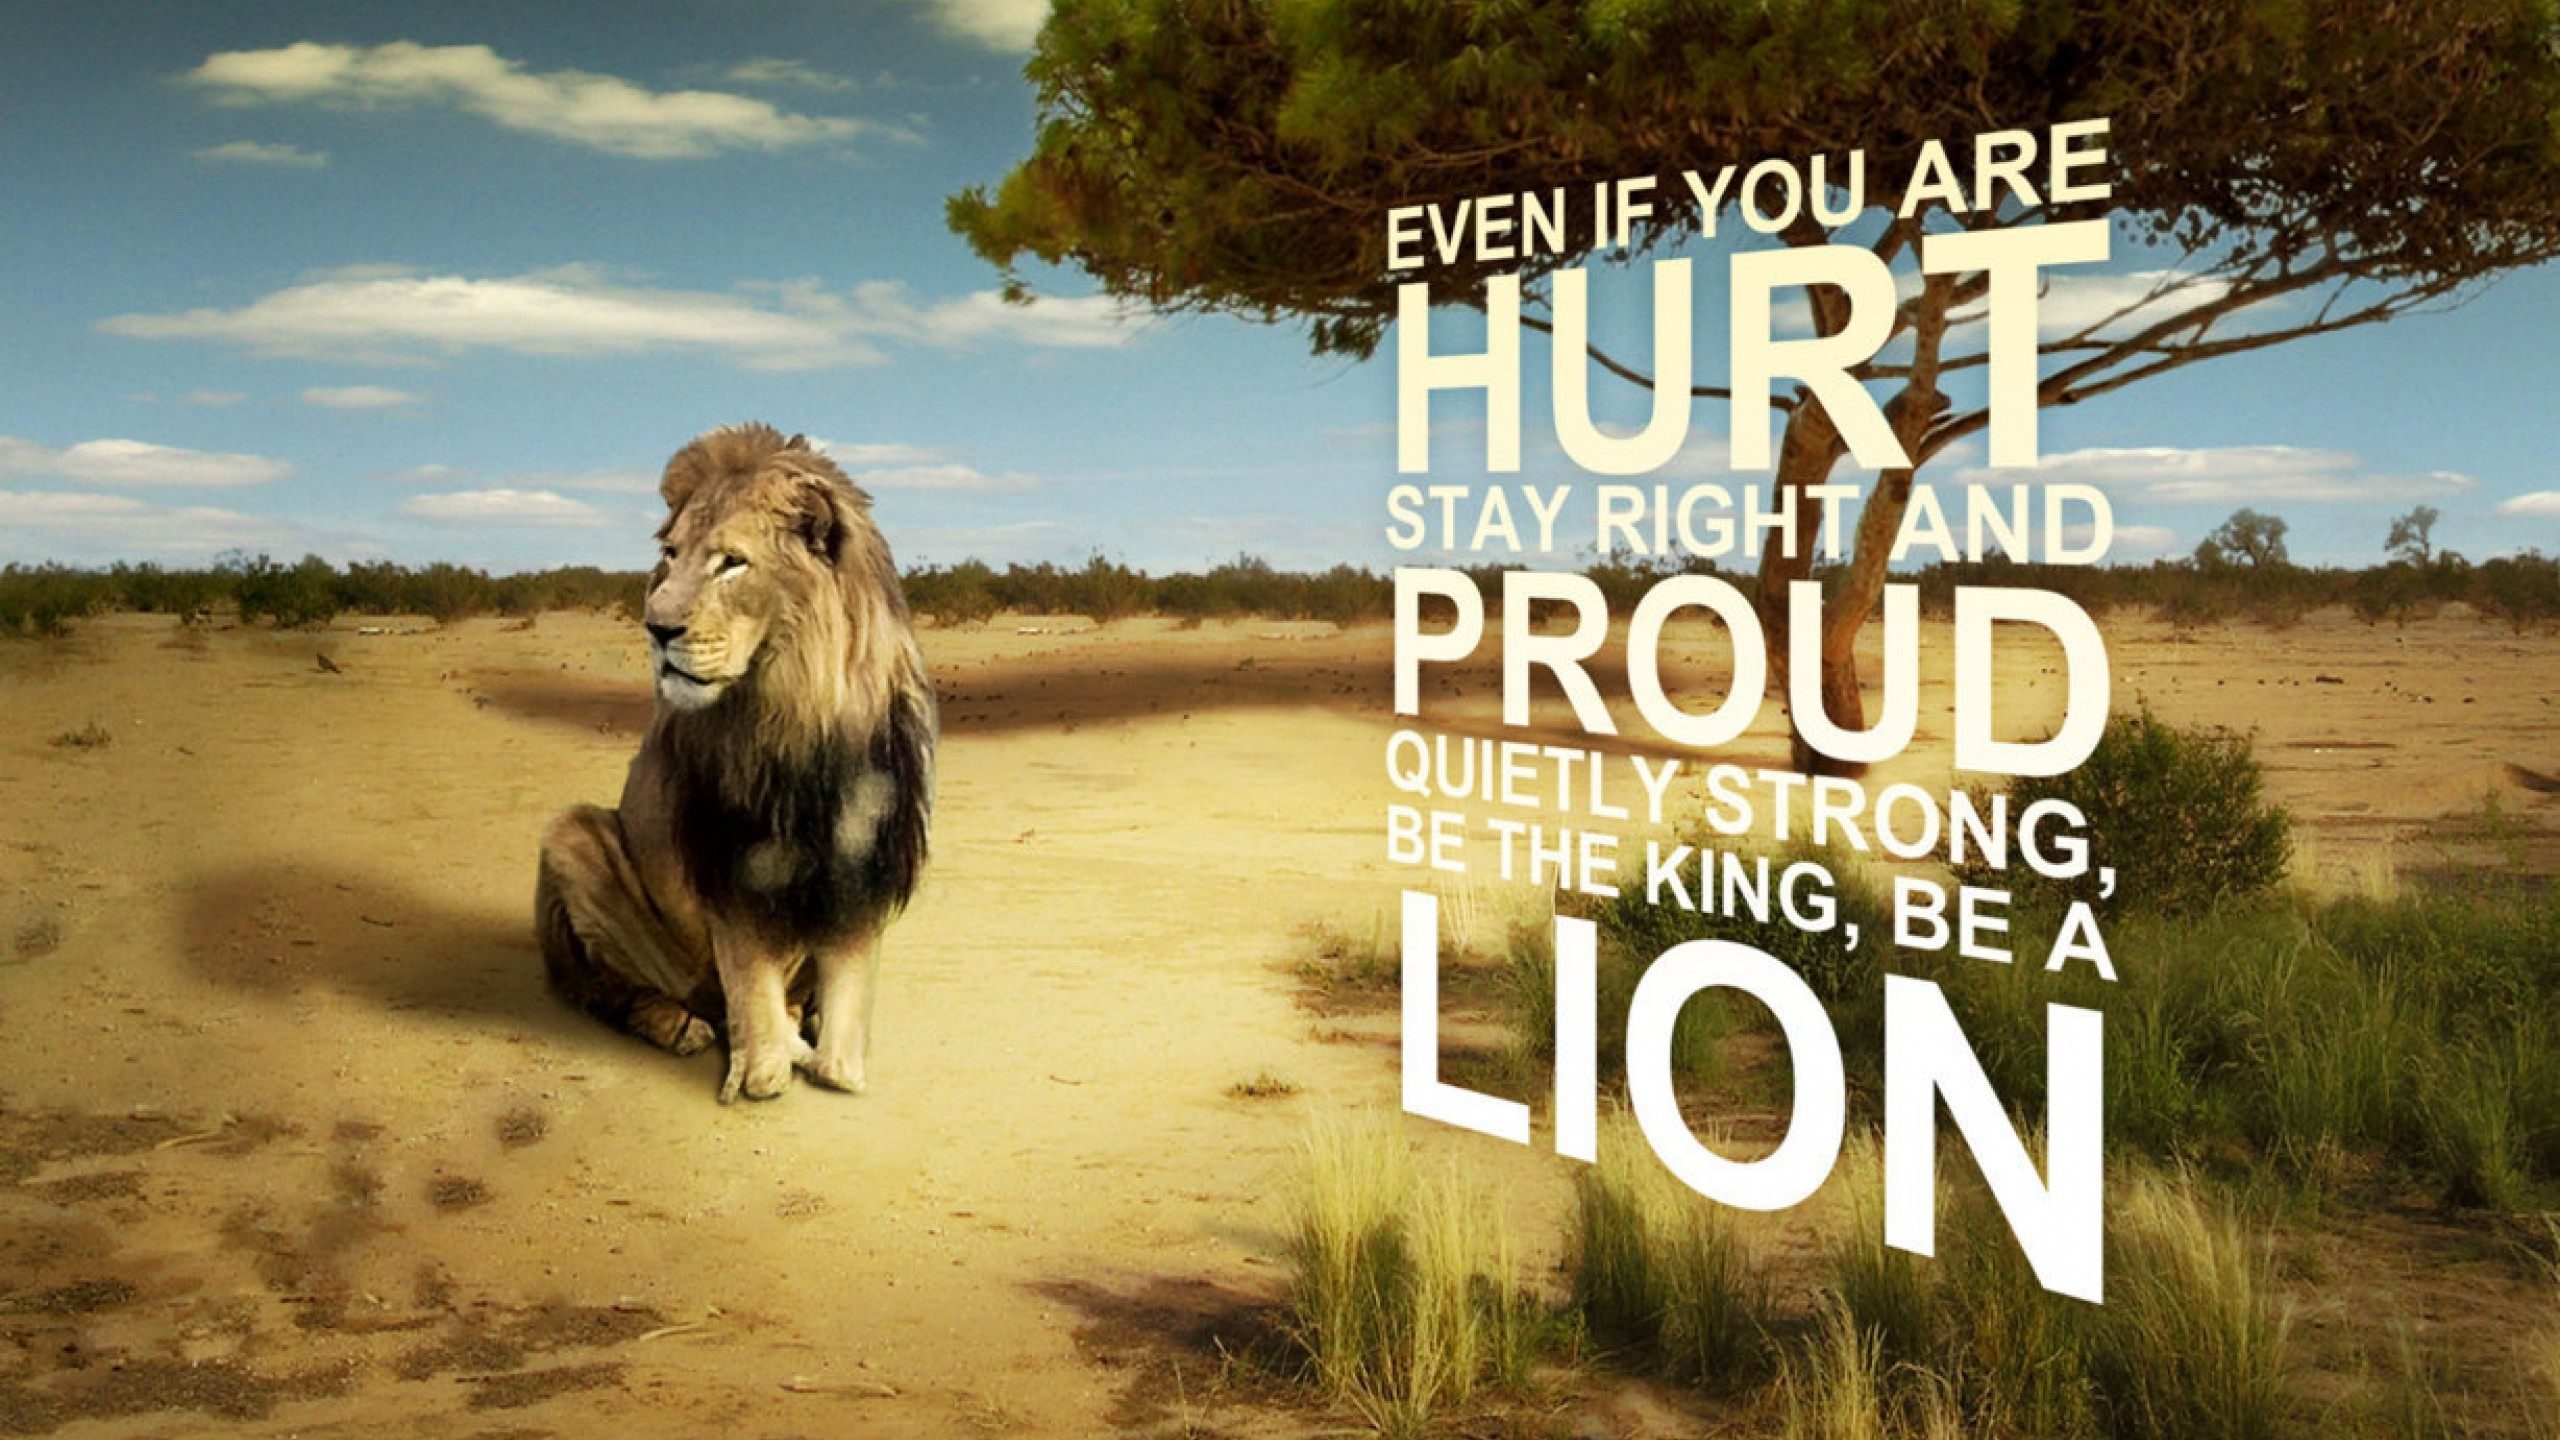 Hd Wallpaper Lion 1080p With Quote